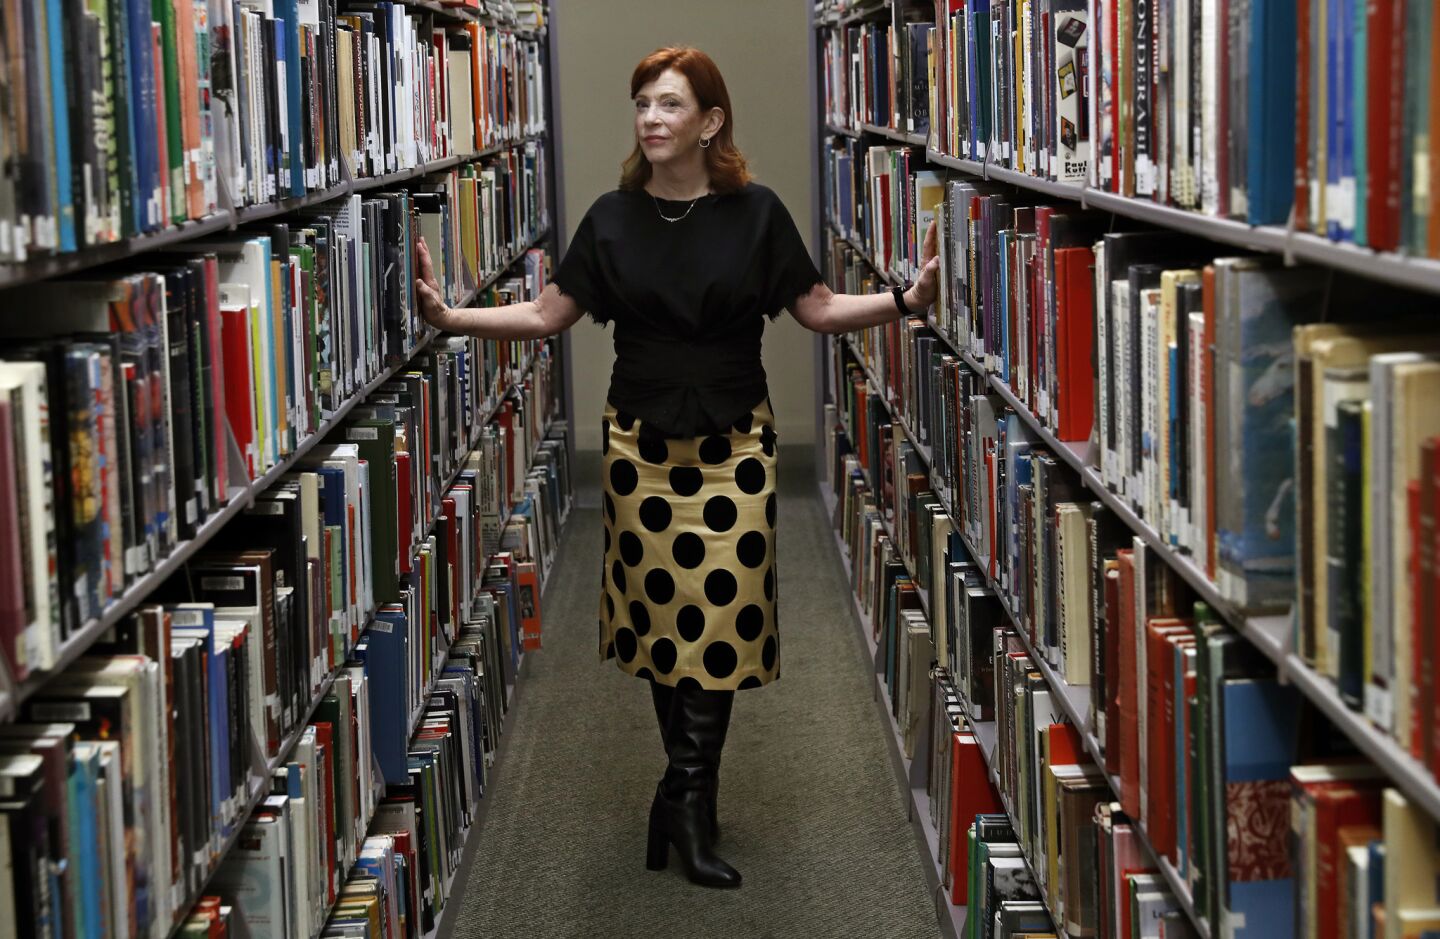 Susan Orlean pauses in the arts and music section at the Los Angeles Central Library.